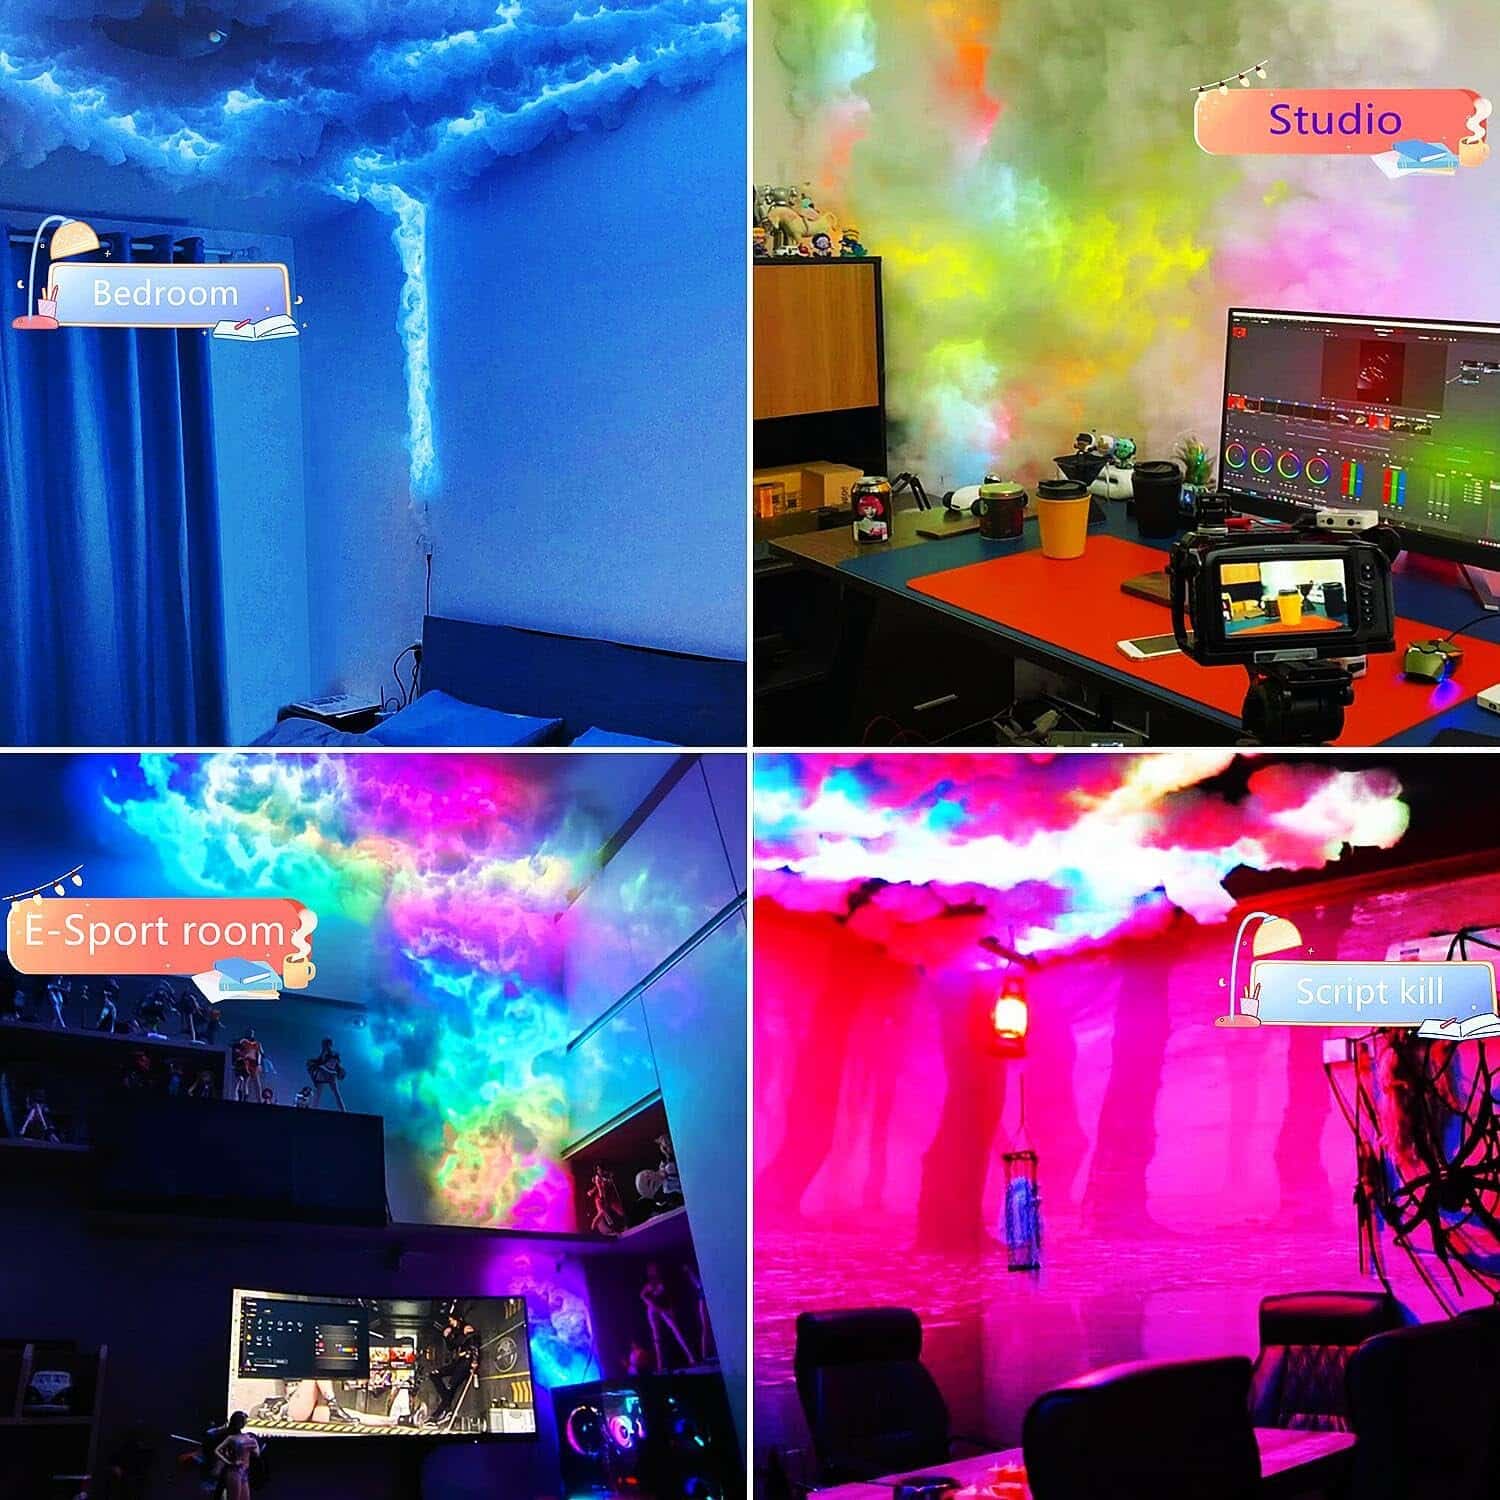 Upgraded 3D Thundercloud LED Light, Cloud Music Sync Multicolor Changing Strip Light, Atmosphere DIY Creative Thunder Cloud Lamp Wall Ceiling Light for Bedroom Gaming Room Party (19.8 FT)